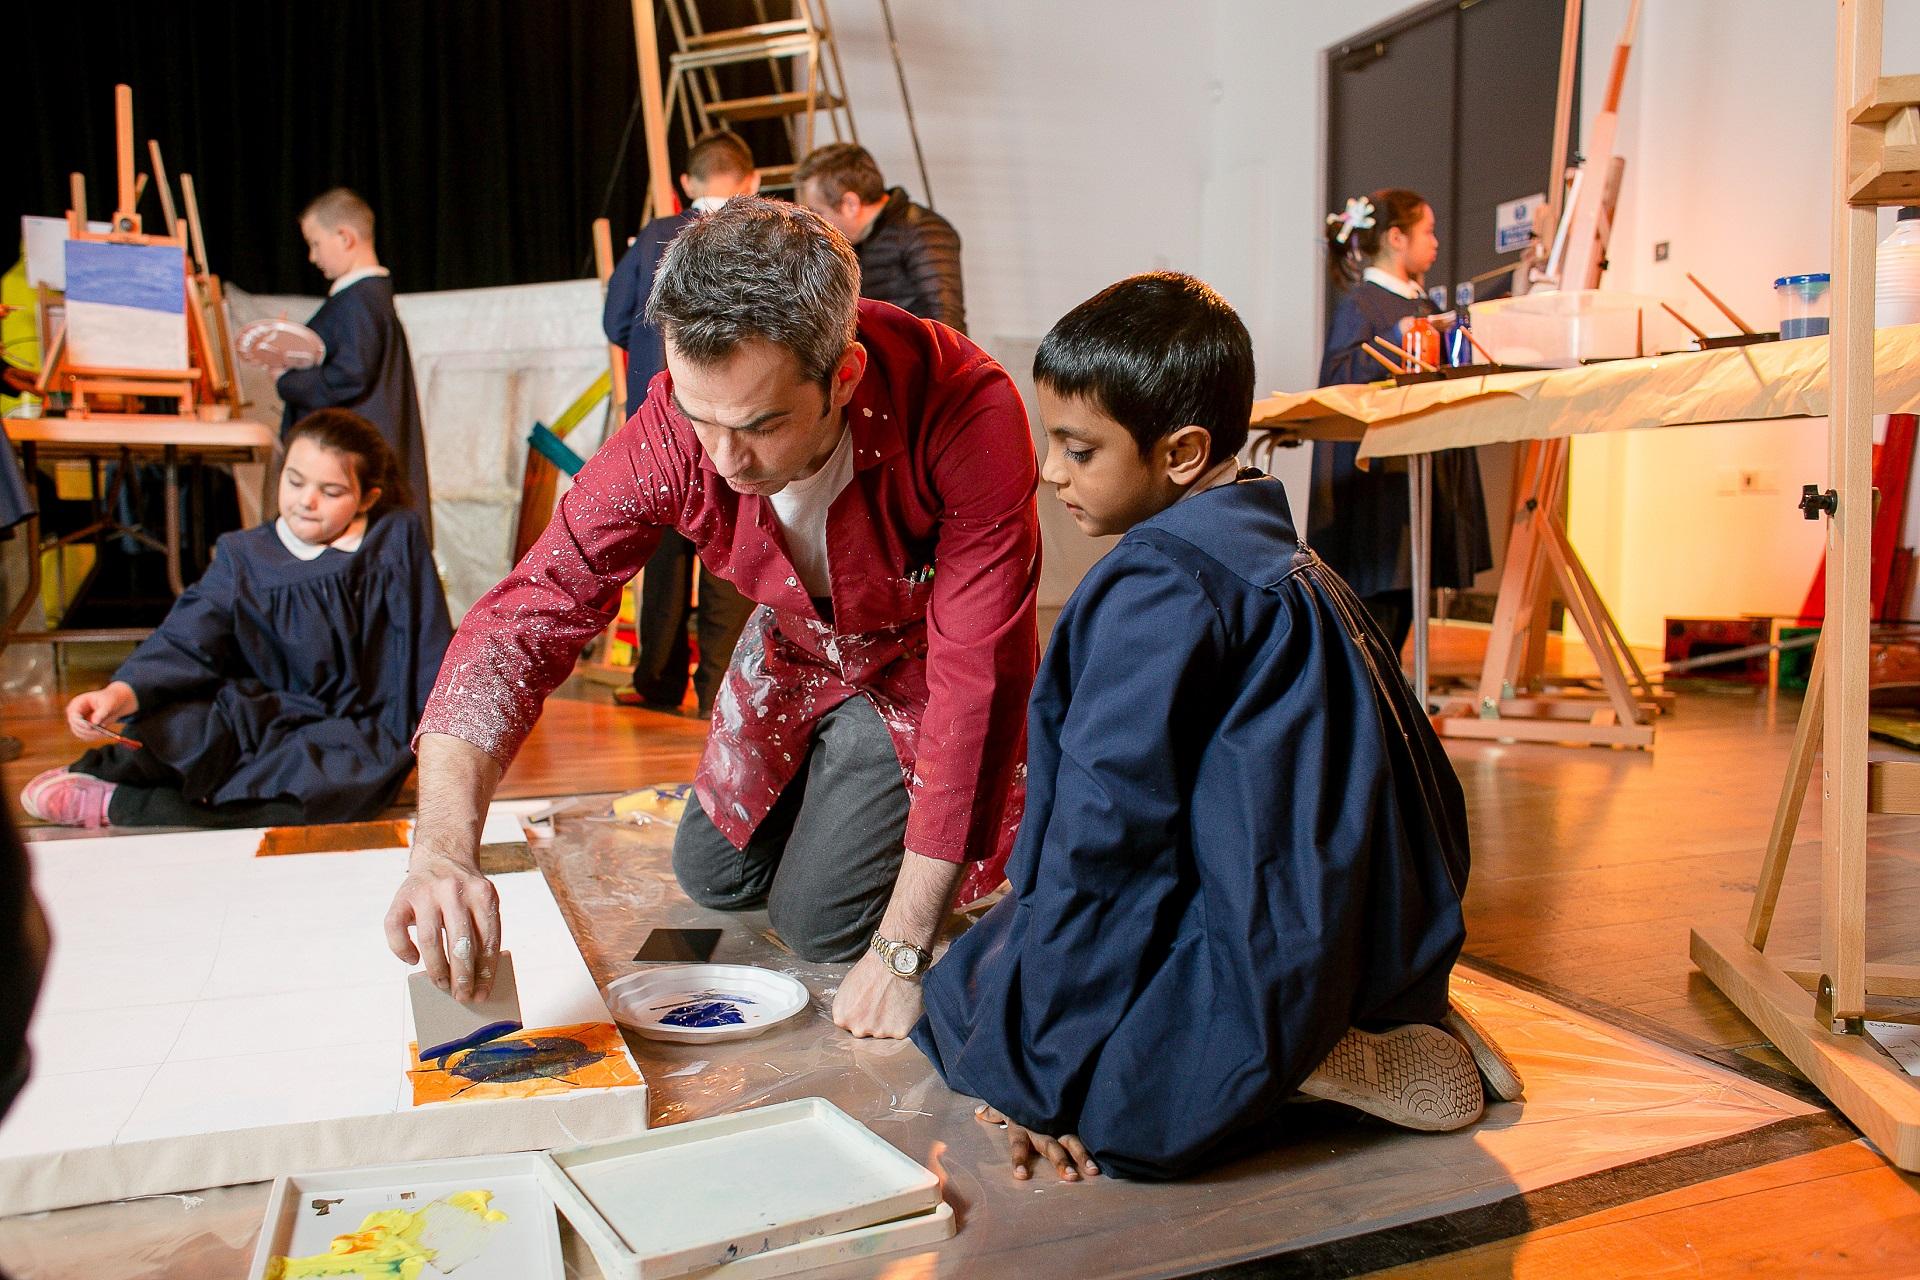 A man teaching a group of school children. They are surrounded by easels and artworks.